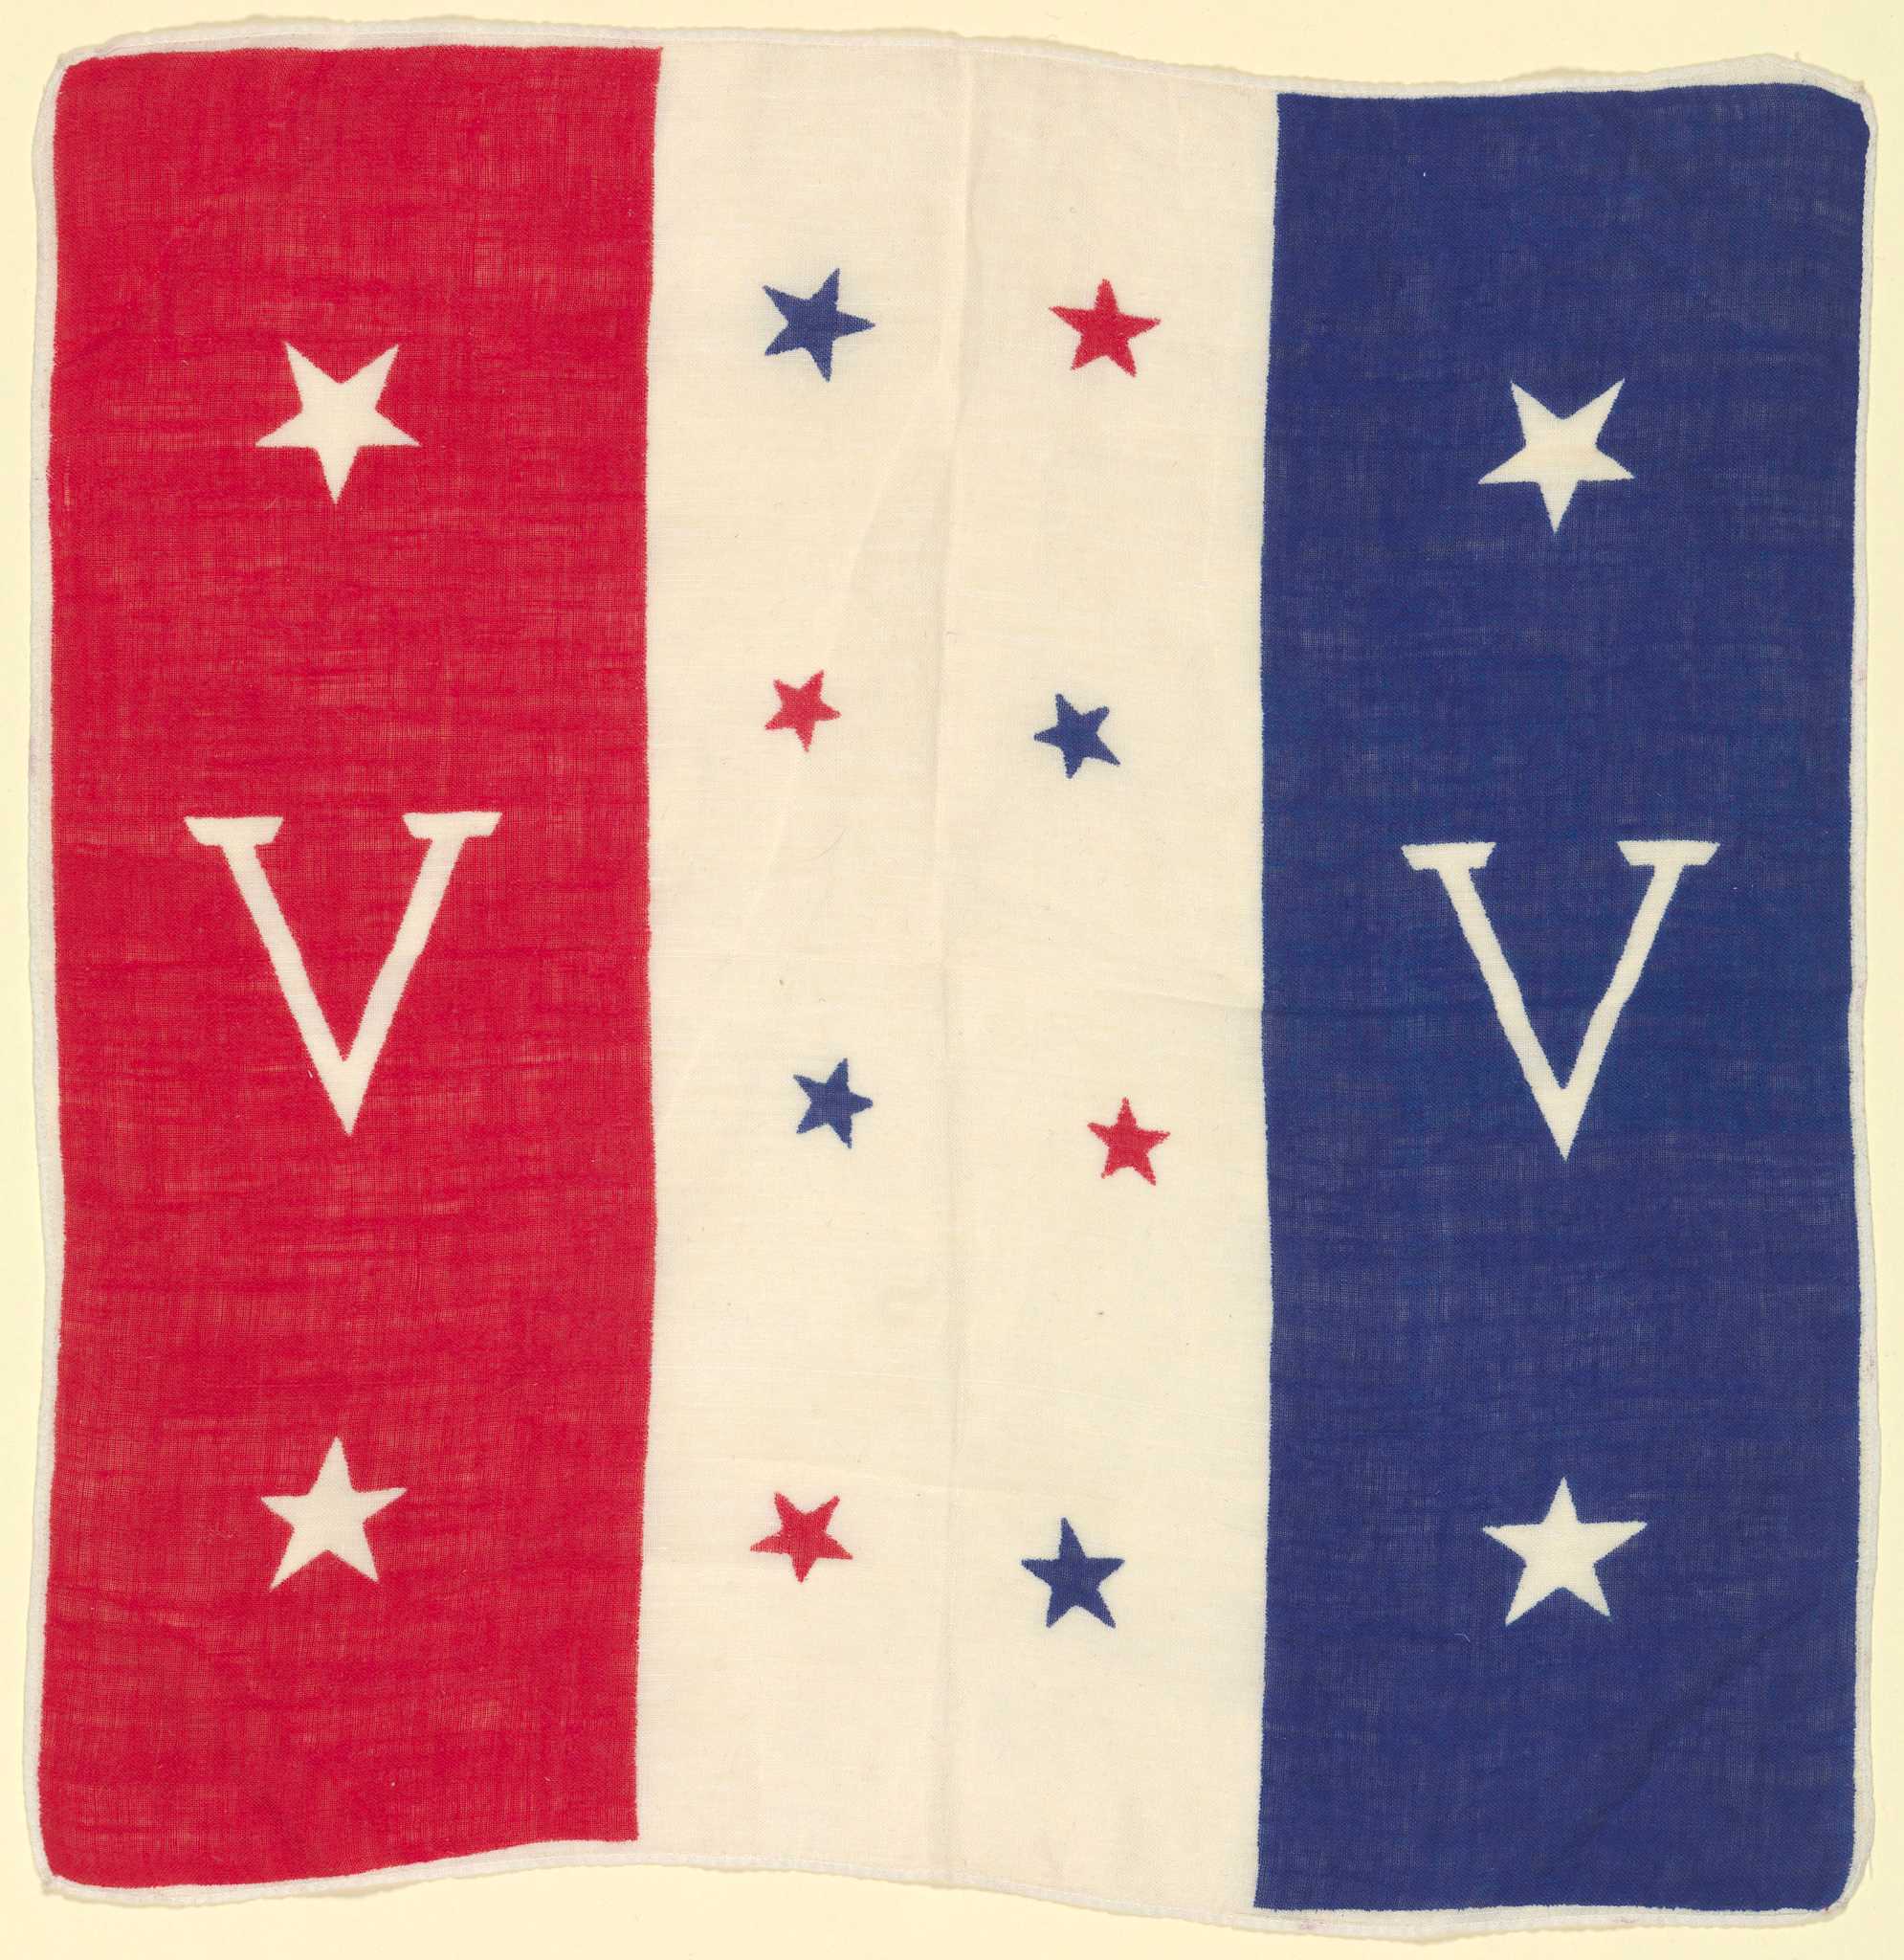 A red, white, and blue linen square handkerchief promoting the Double V campaign of World War II. The white fabric is printed with red and blue dye to create a design of three (3) vertical stripes colored from left to right in red, white, and blue. The blue and red stripes have a block letter "V" in white at the center, with two (2) white five-pointed stars, one each above and below the V. The center white stripe has eight (8) five-pointed stars printed in two colums of four alternating in red and blue. The fabric has a machine-stitched rolled hem and the printed design can be seen on both sides of the fabric.